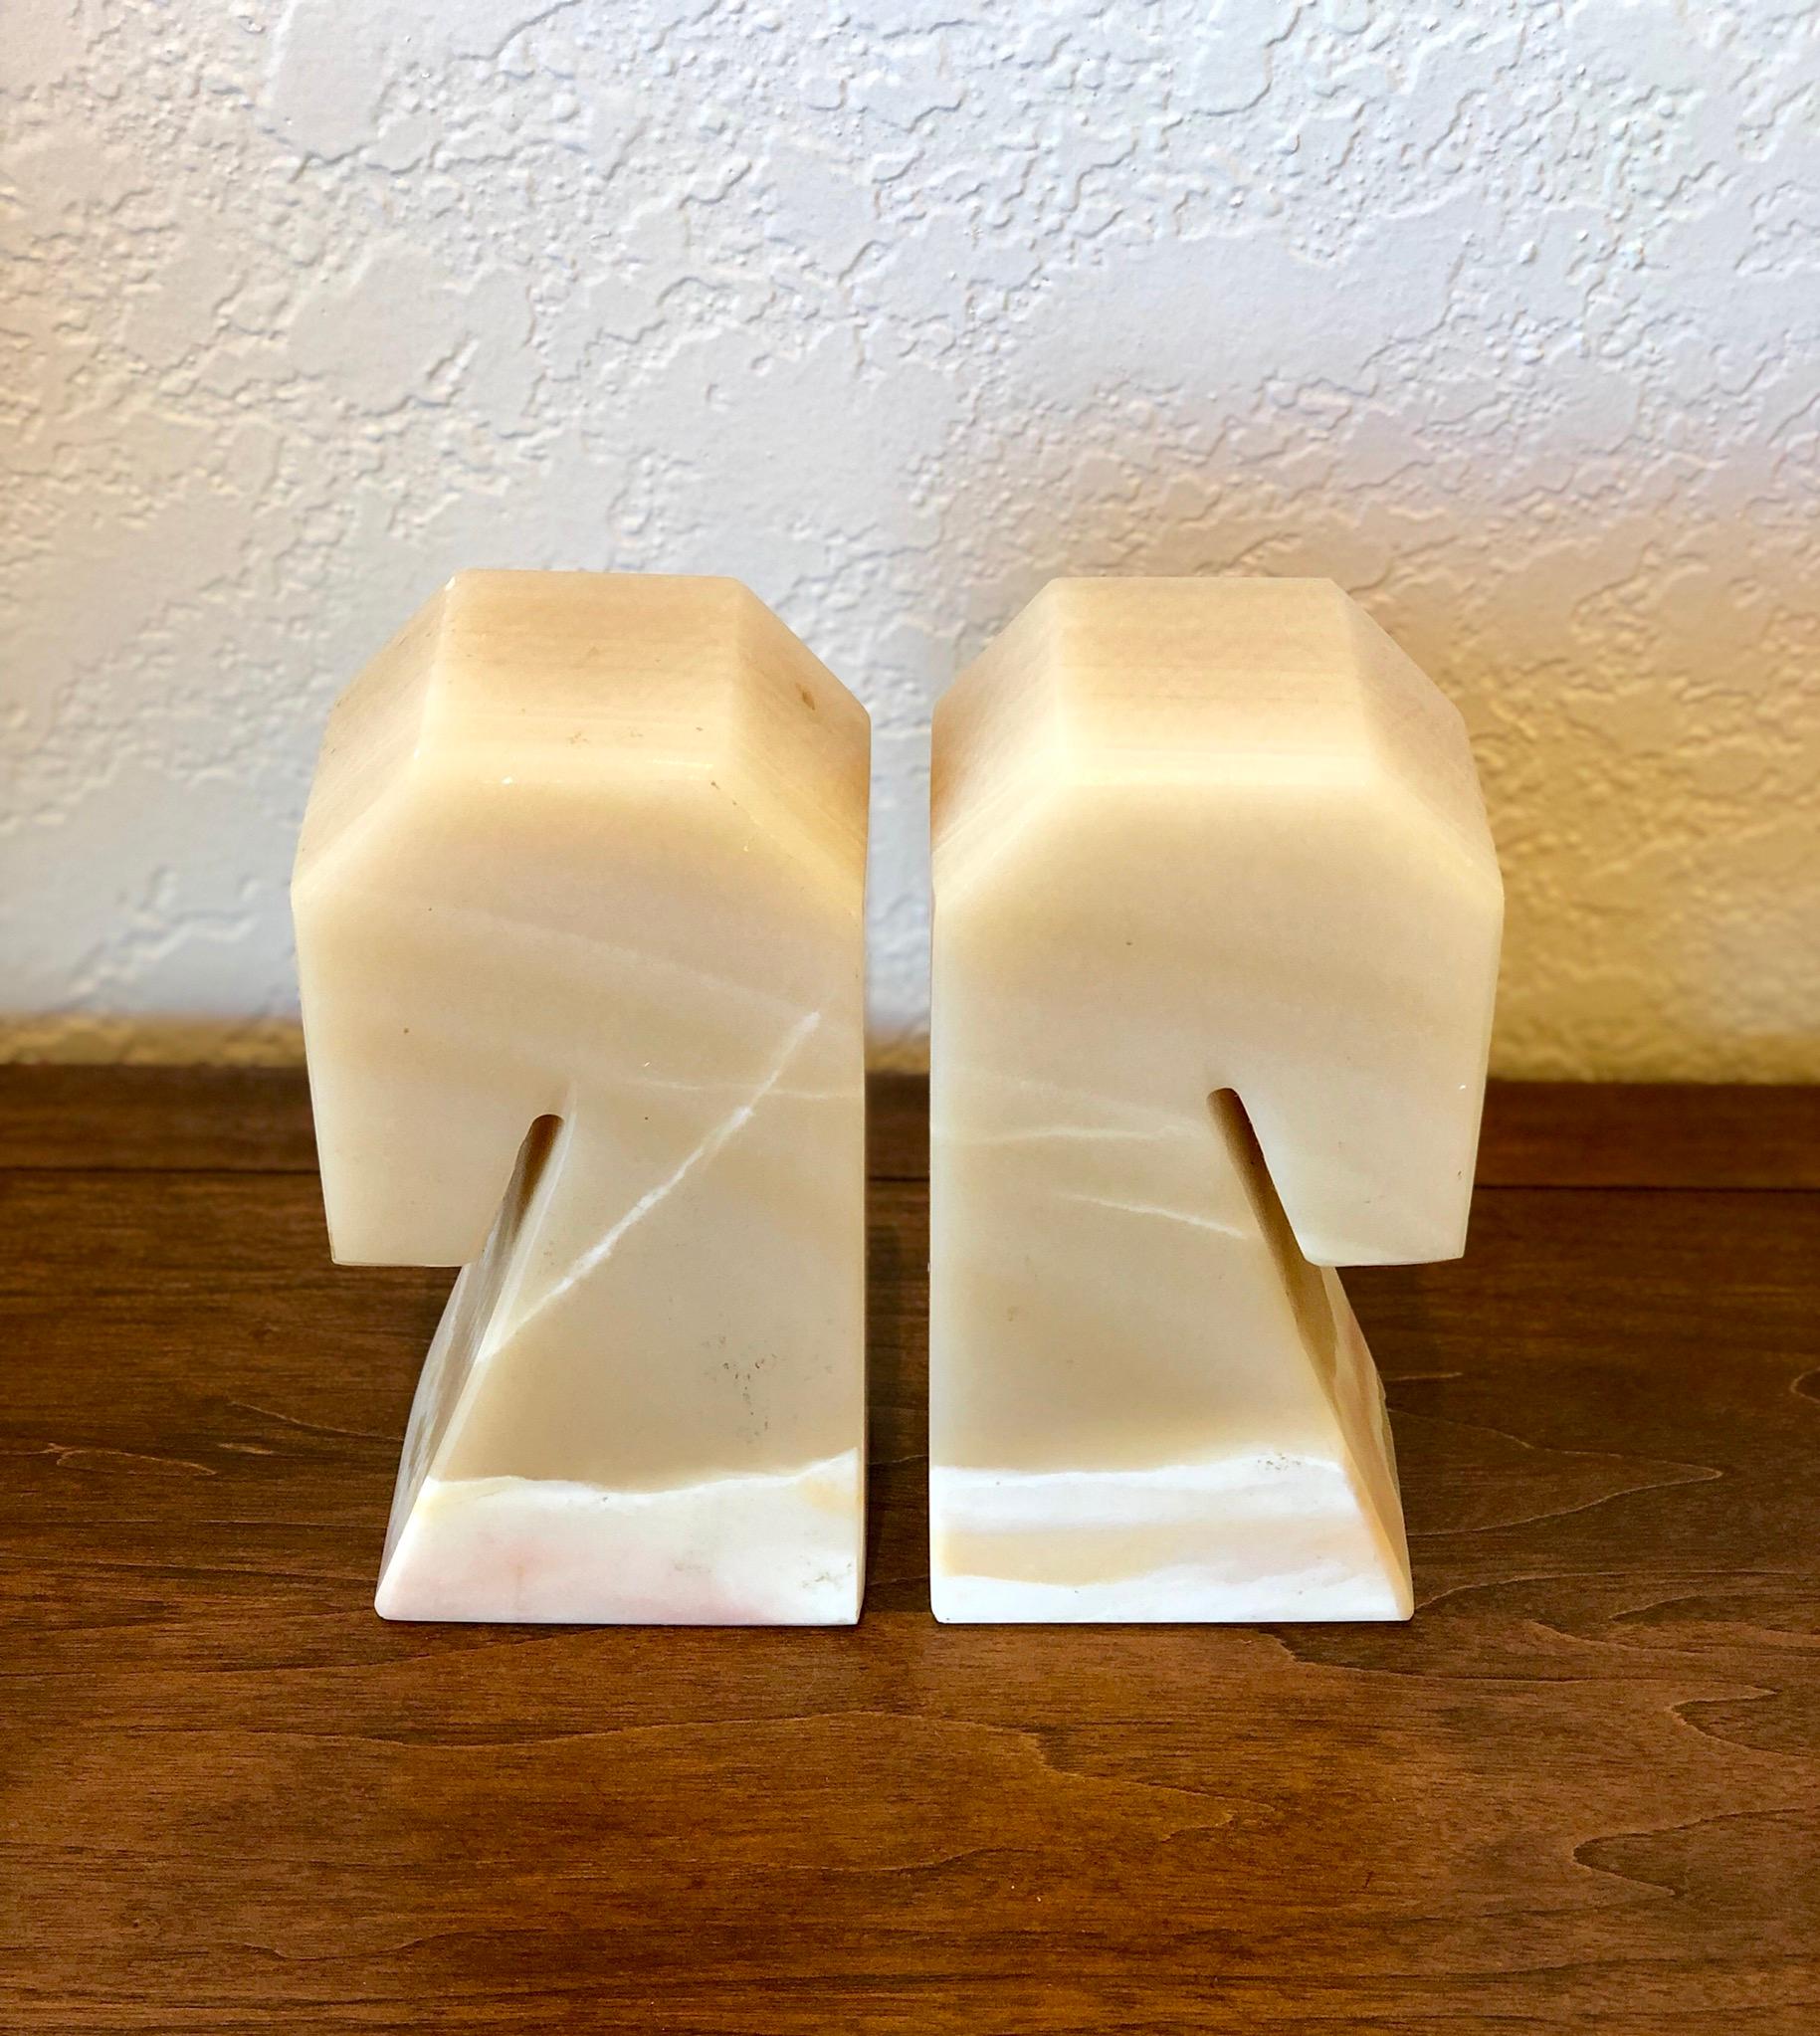 Substantial pair of solid onyx bookends, circa 1970s. Made in Mexico polished onyx, nice pieces.